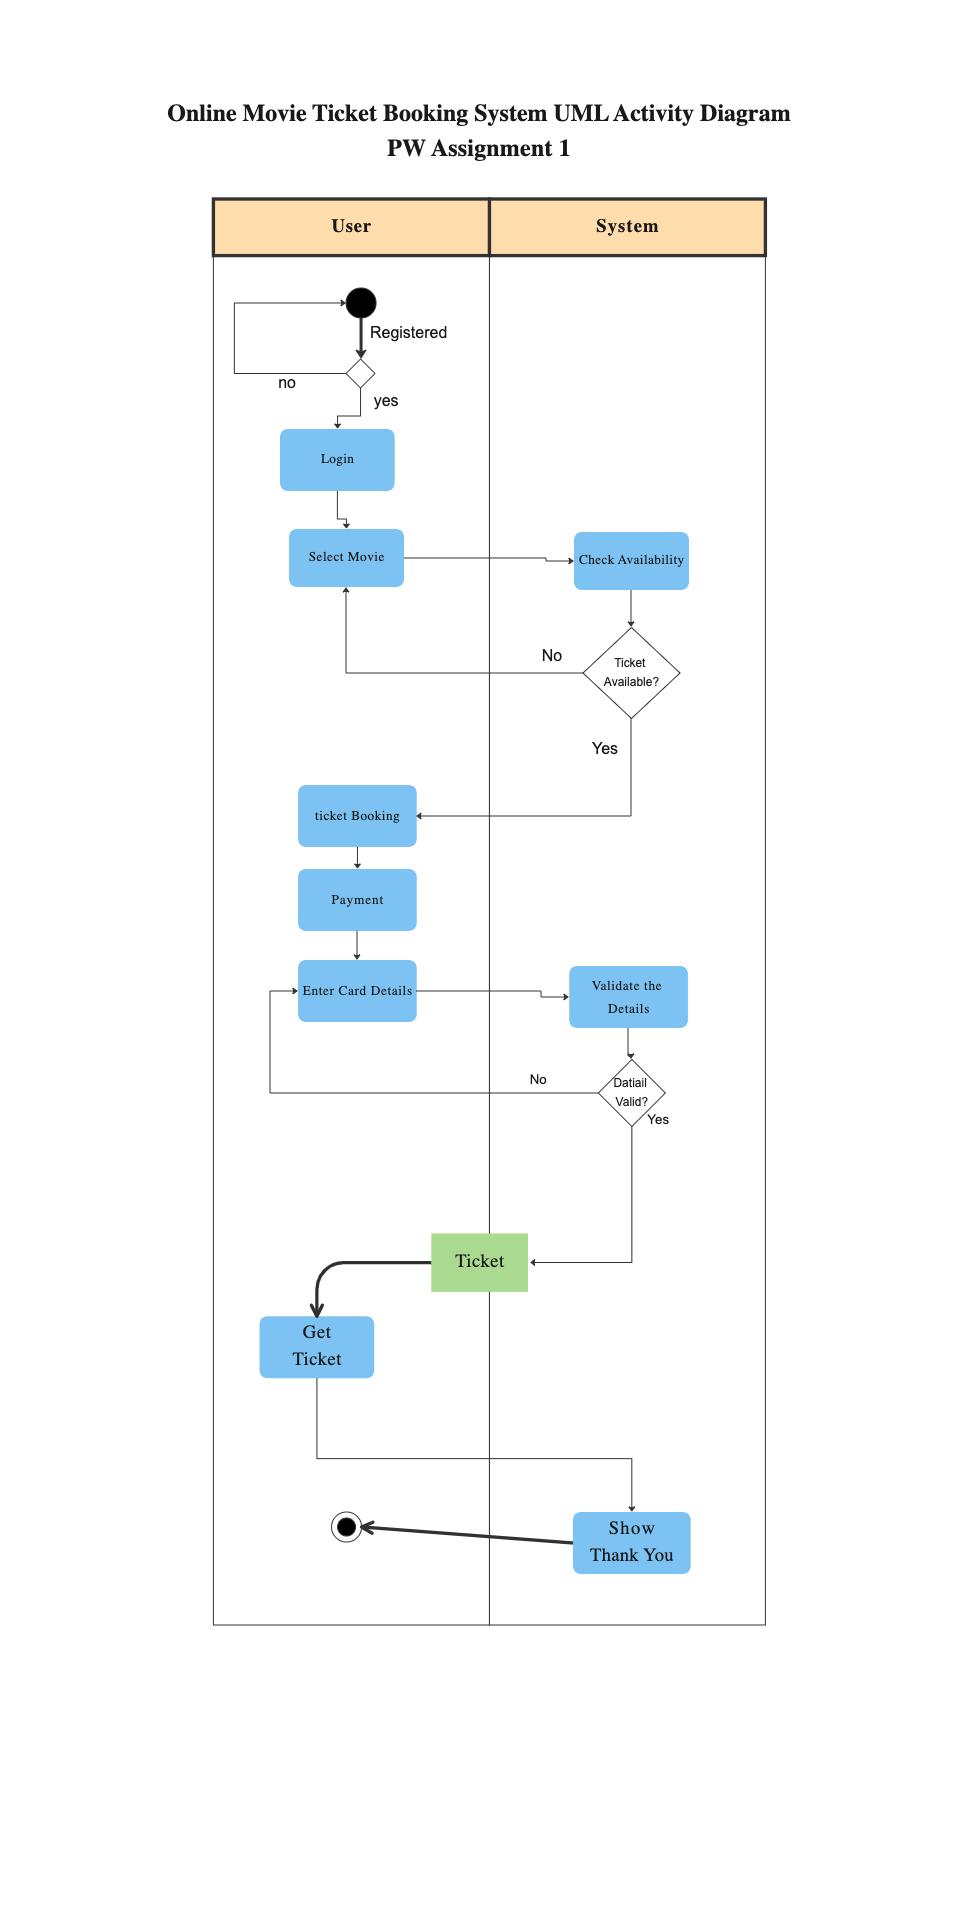 UML Activity Diagram for Movie Ticket Booking System